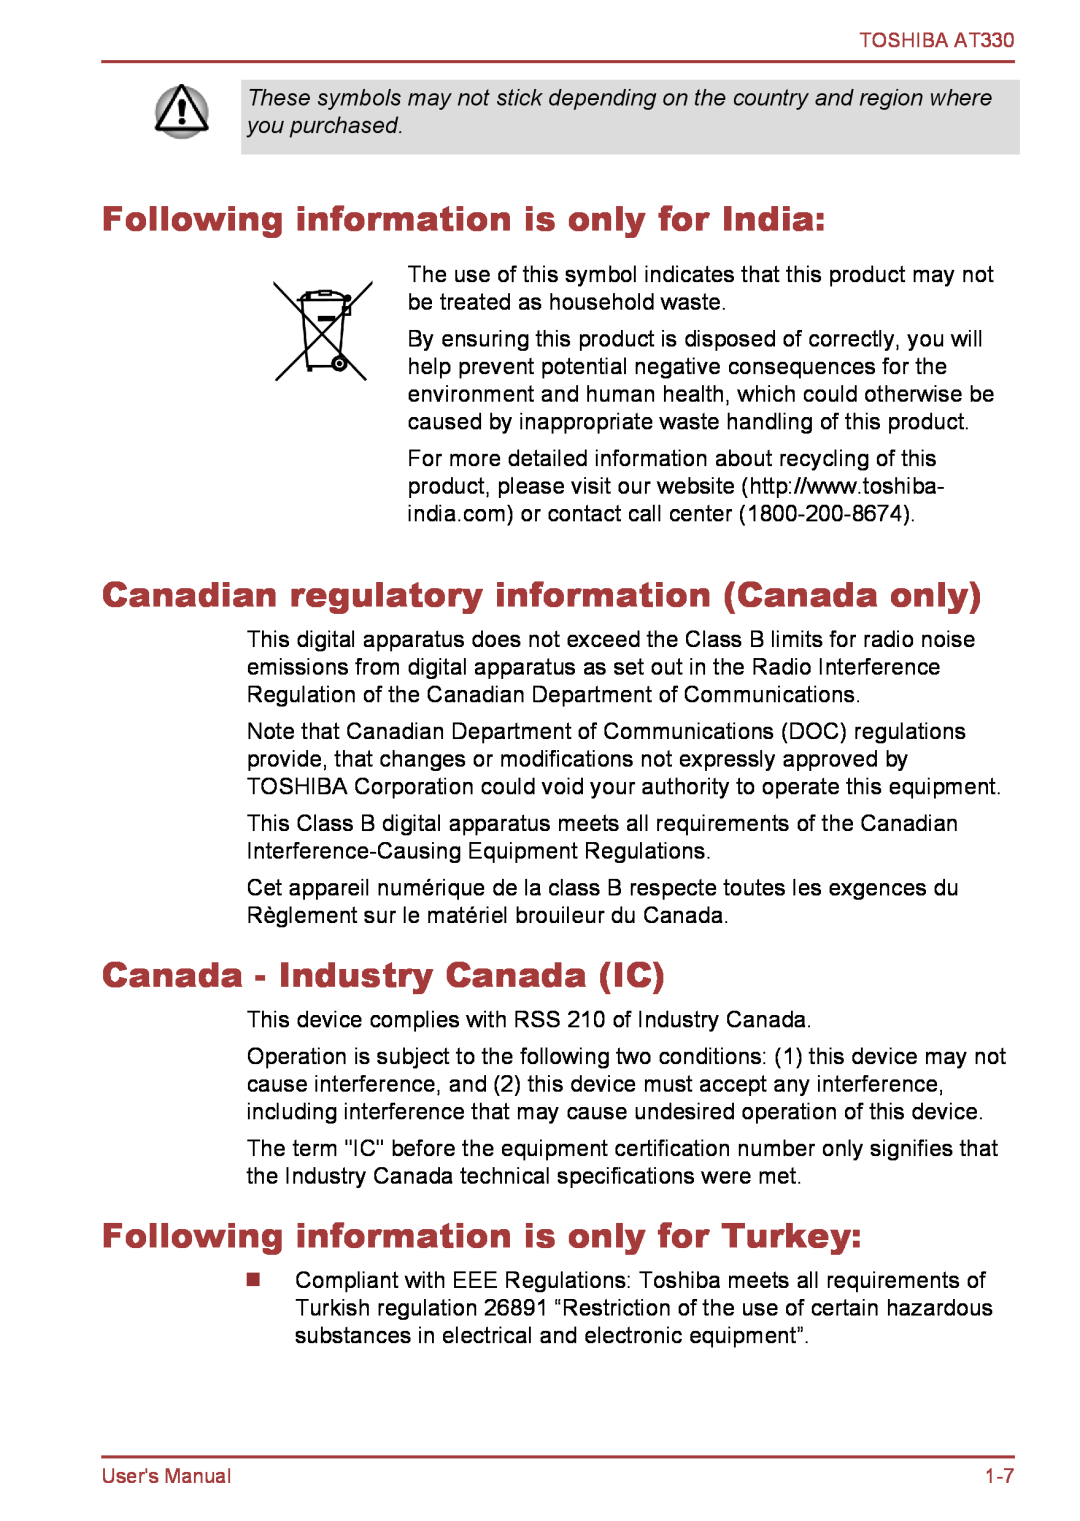 Toshiba at330 user manual Following information is only for India, Canadian regulatory information Canada only 